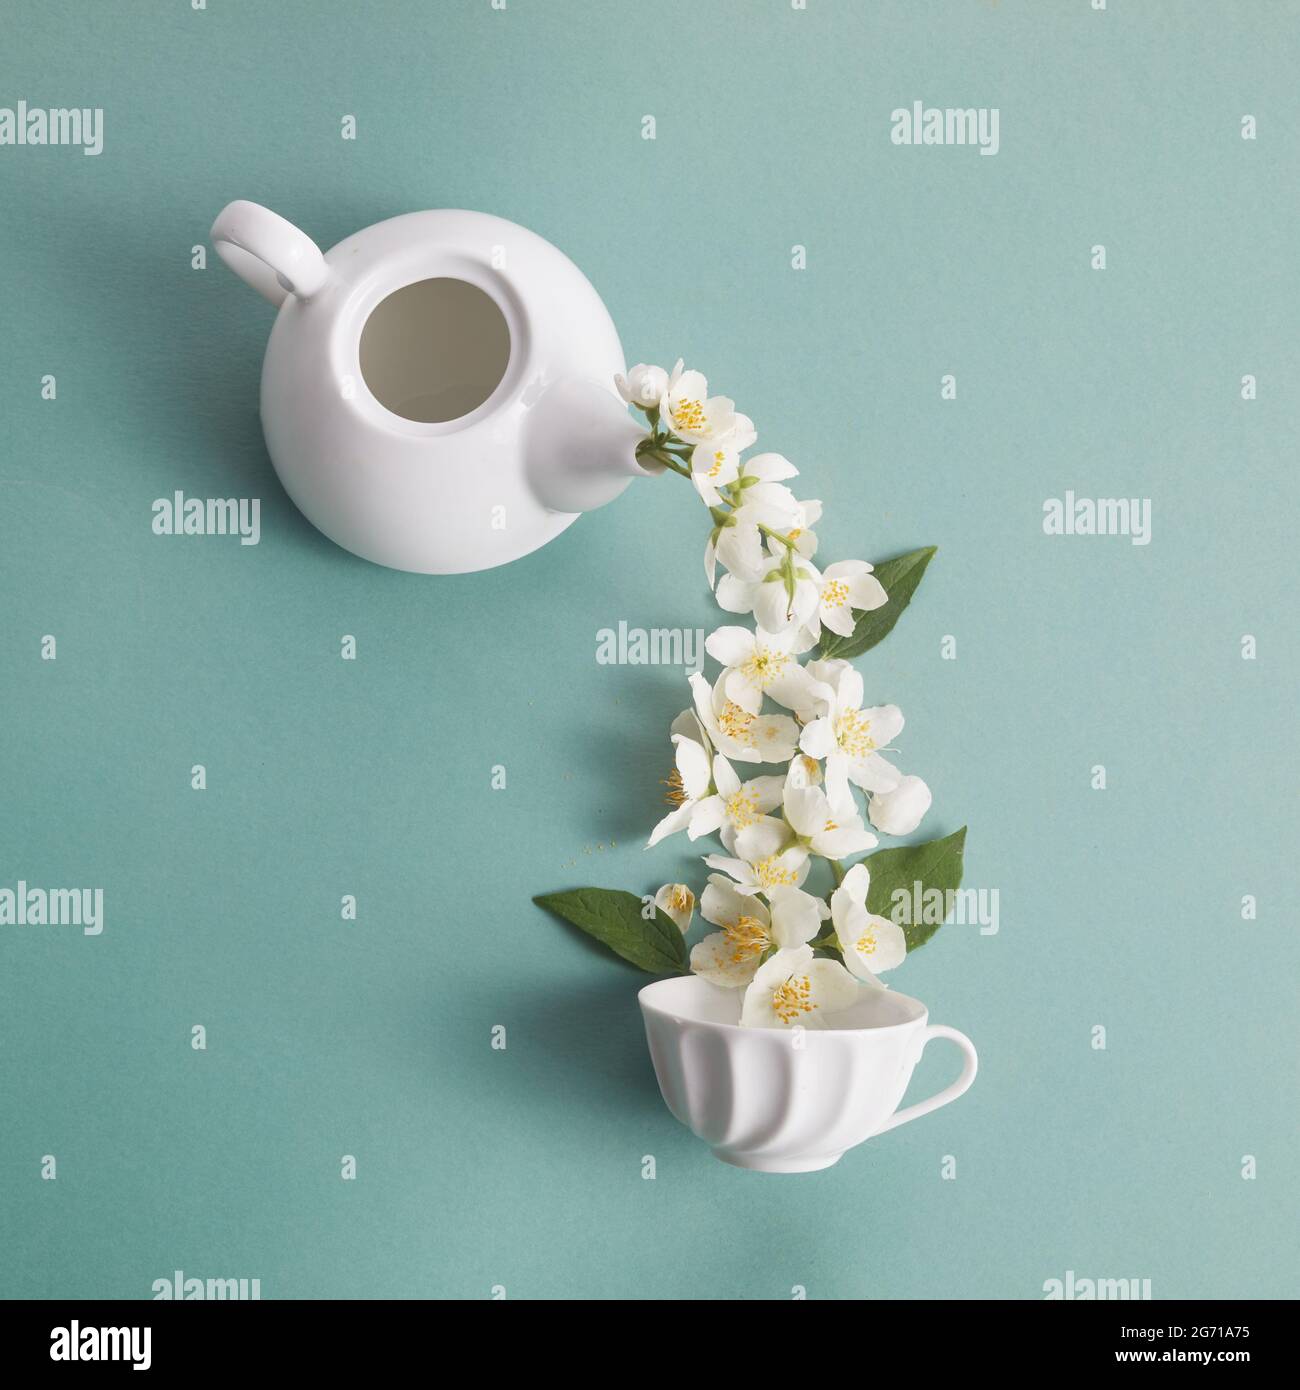 Tea Flower in a Clear Teapot Stock Photo by aetb